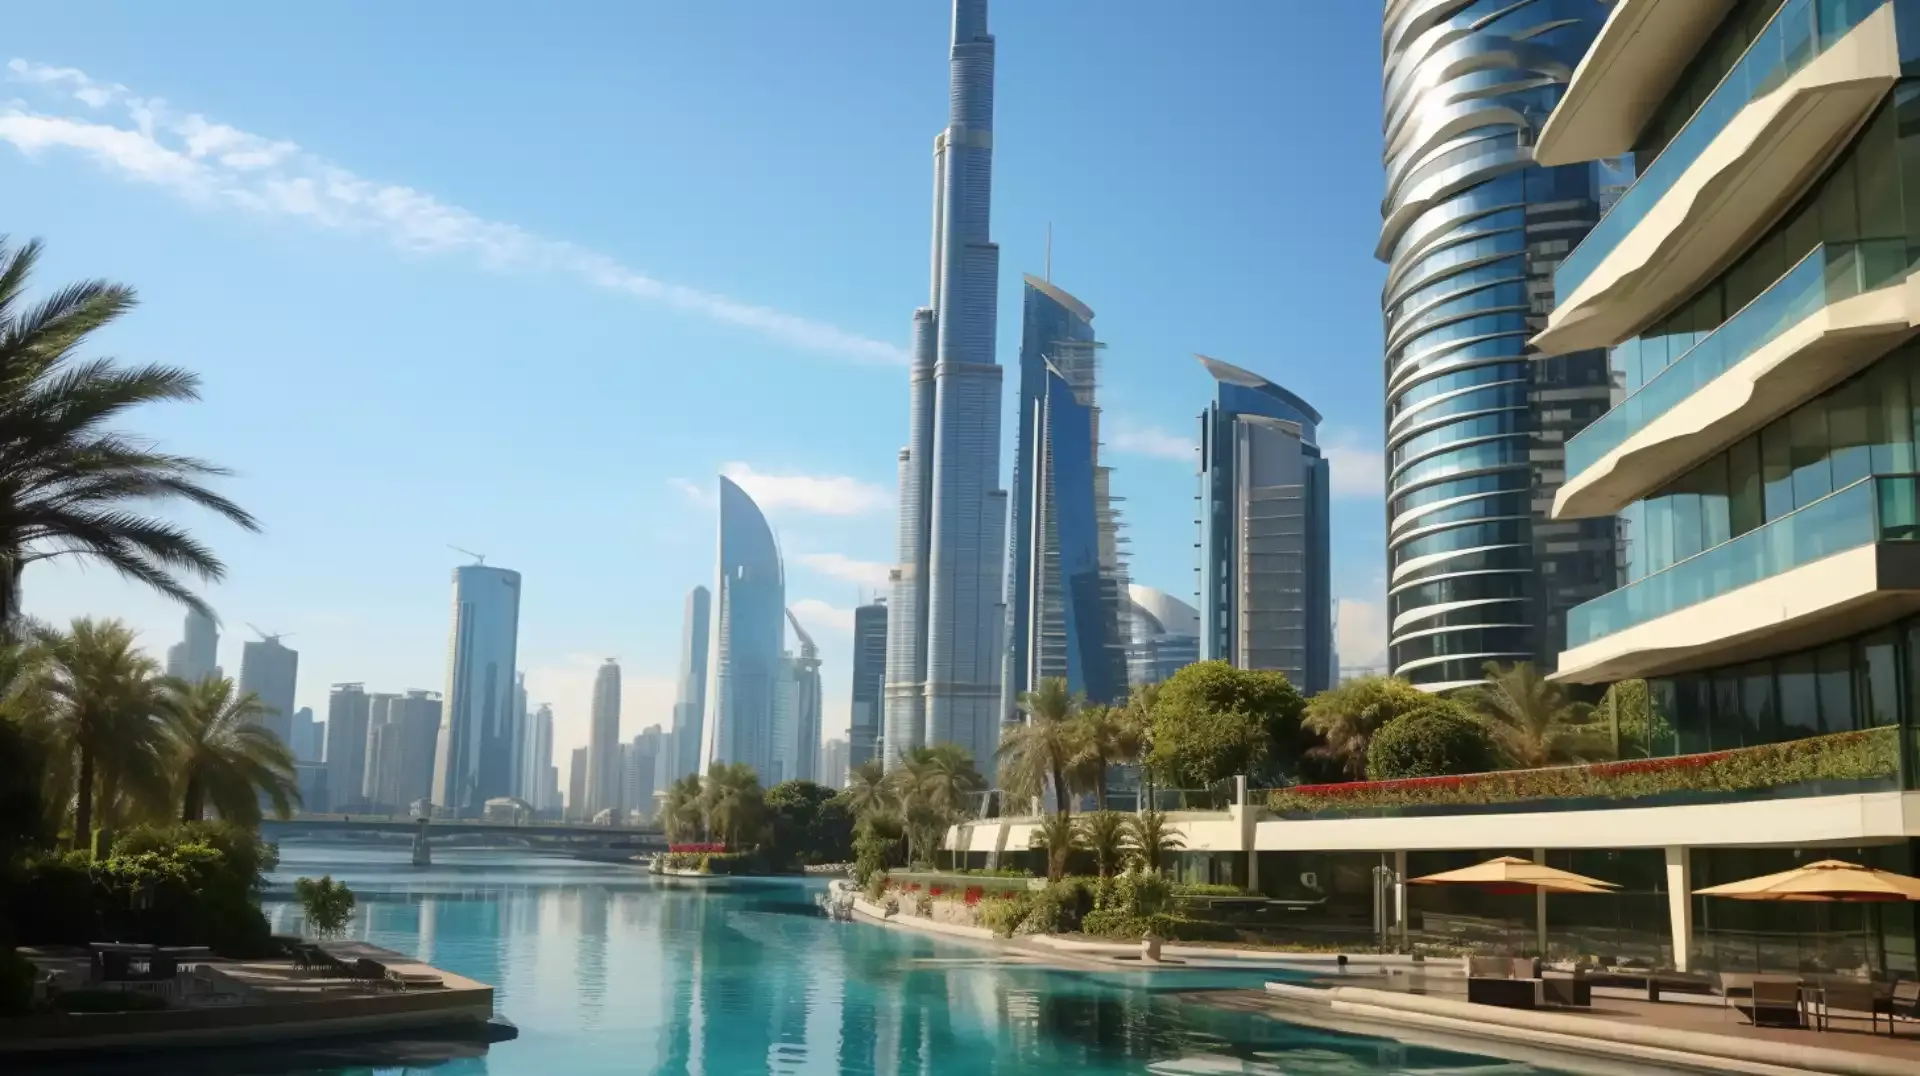 Modern architecture blending with nature in Waterfront Living at JLT 